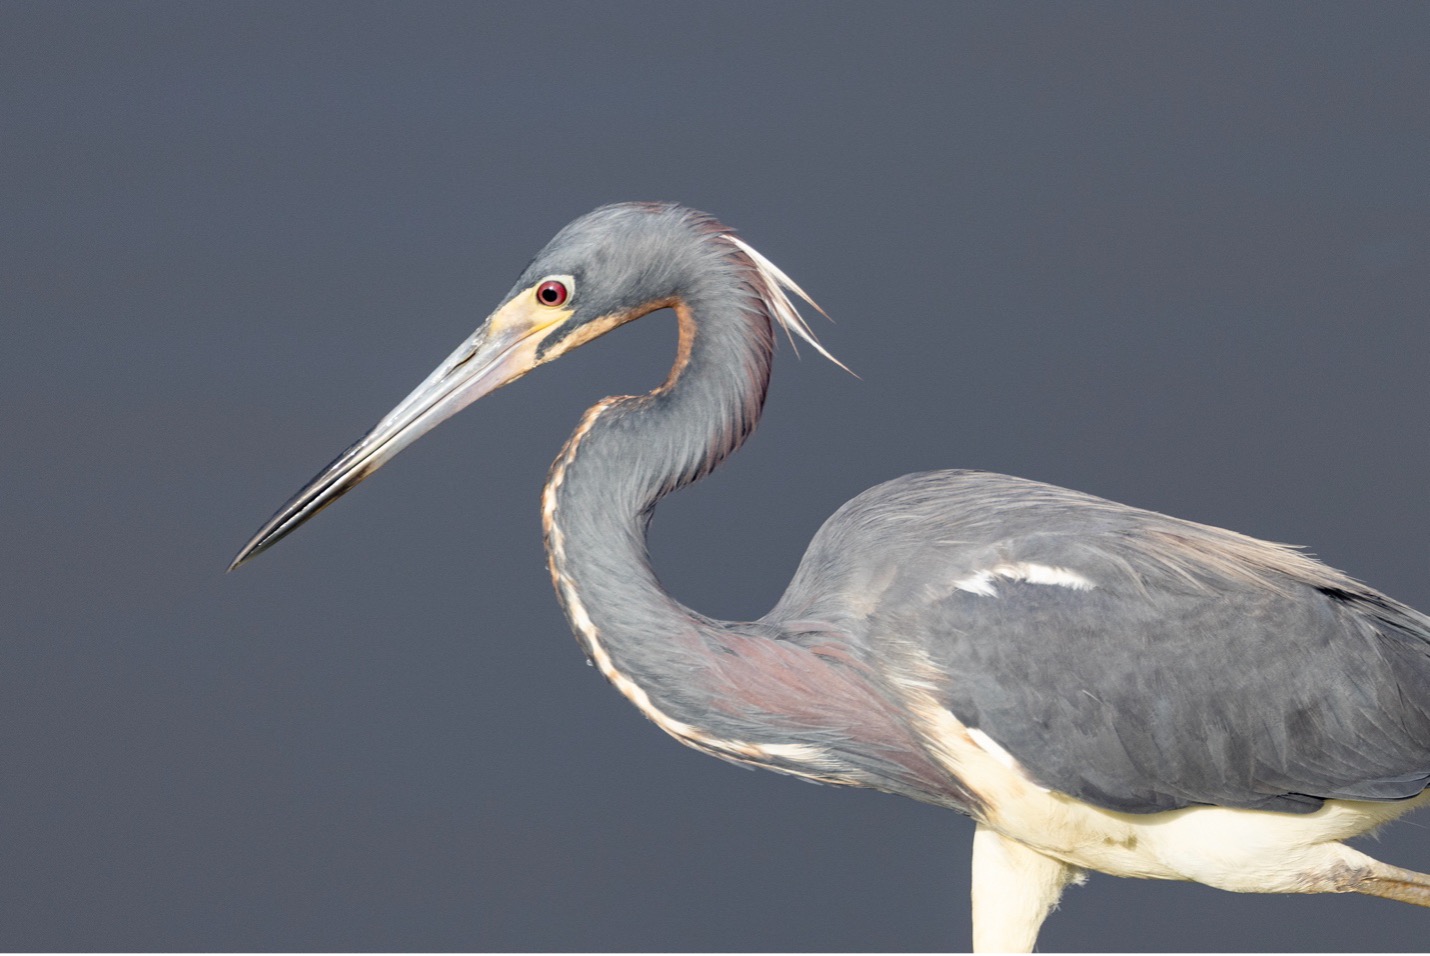 a tricolored heron stalks its prey at the shoreline